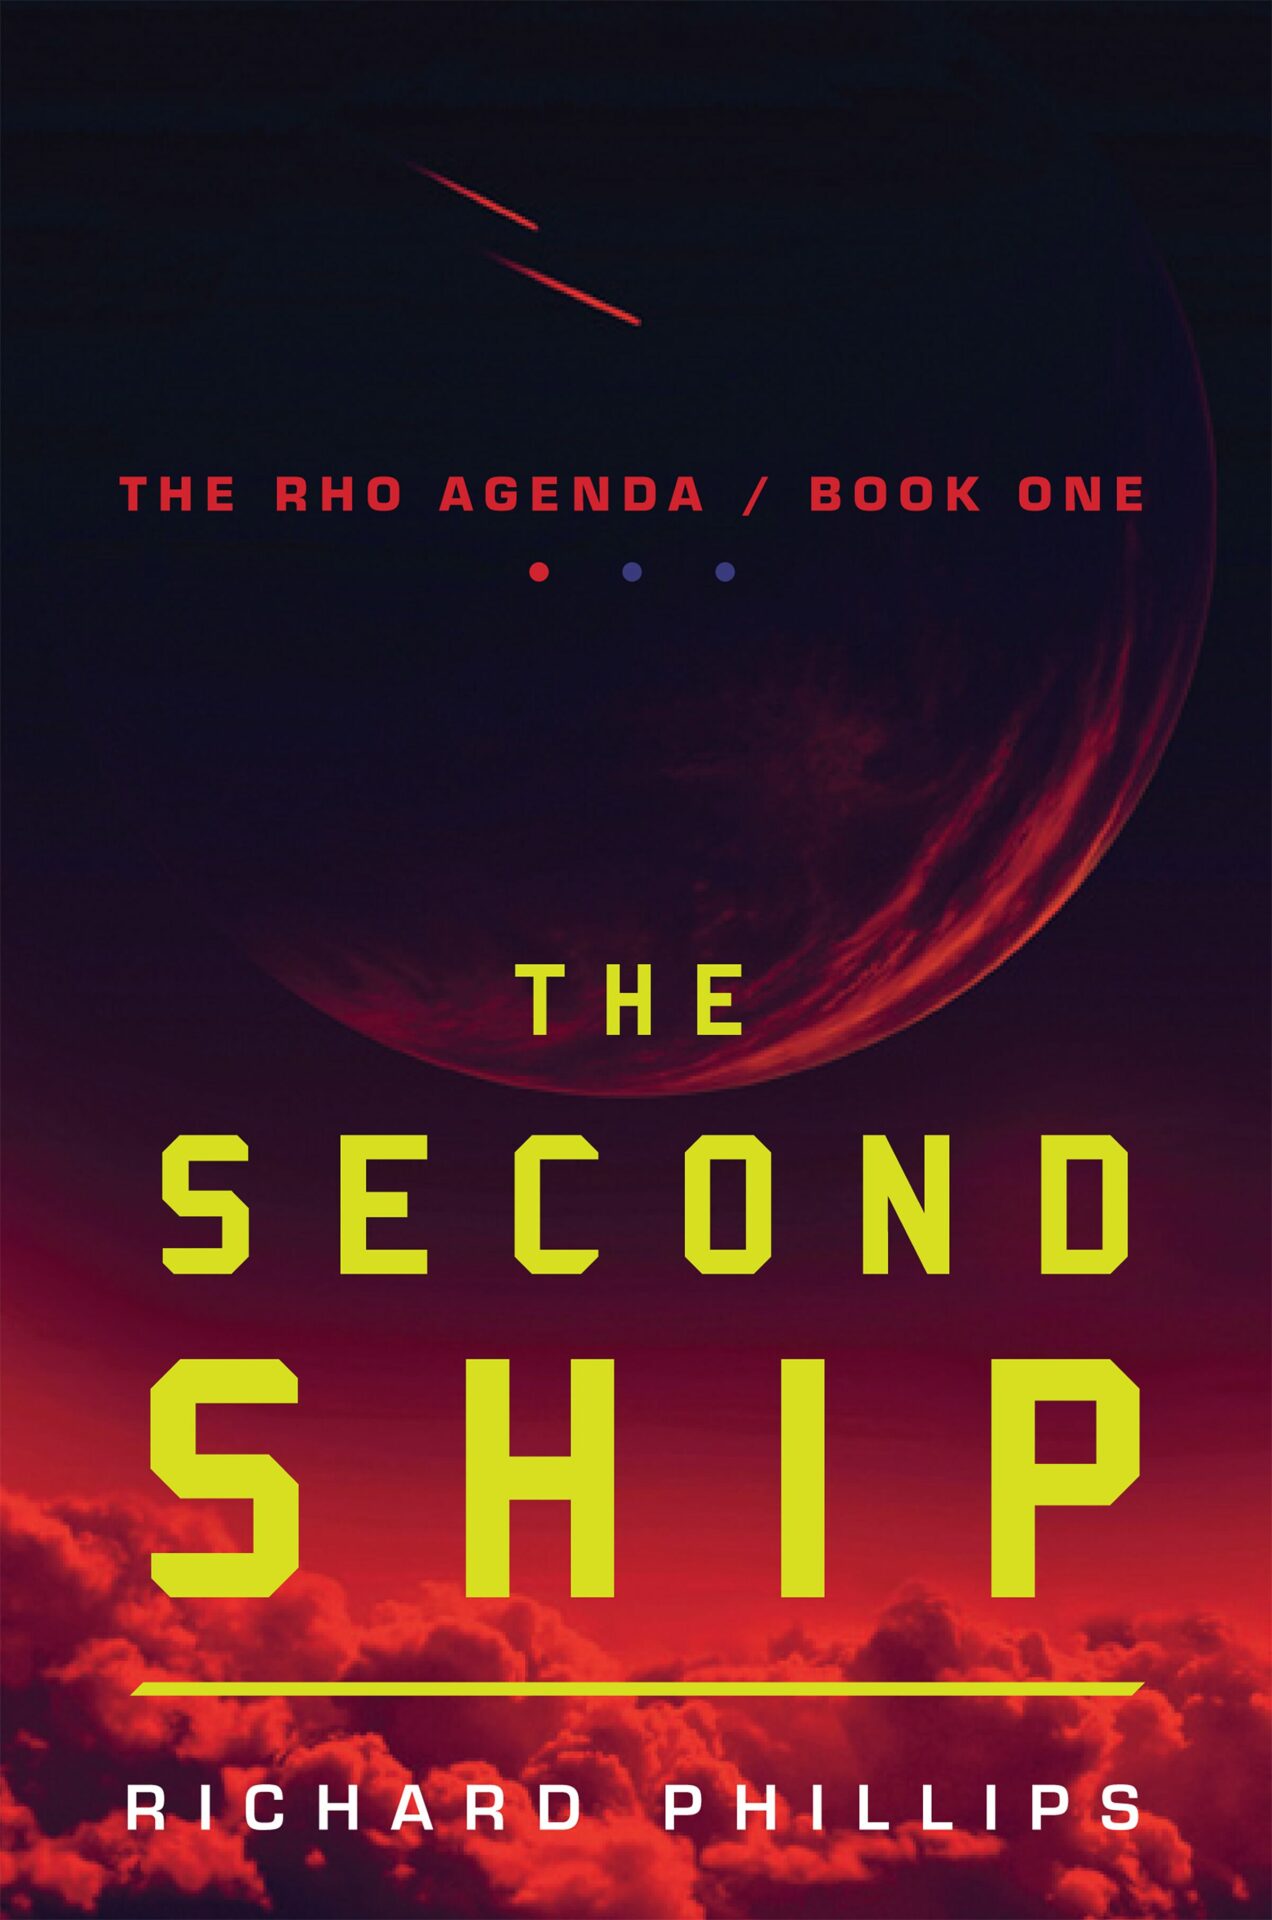 The Second Ship by Richard Phillips